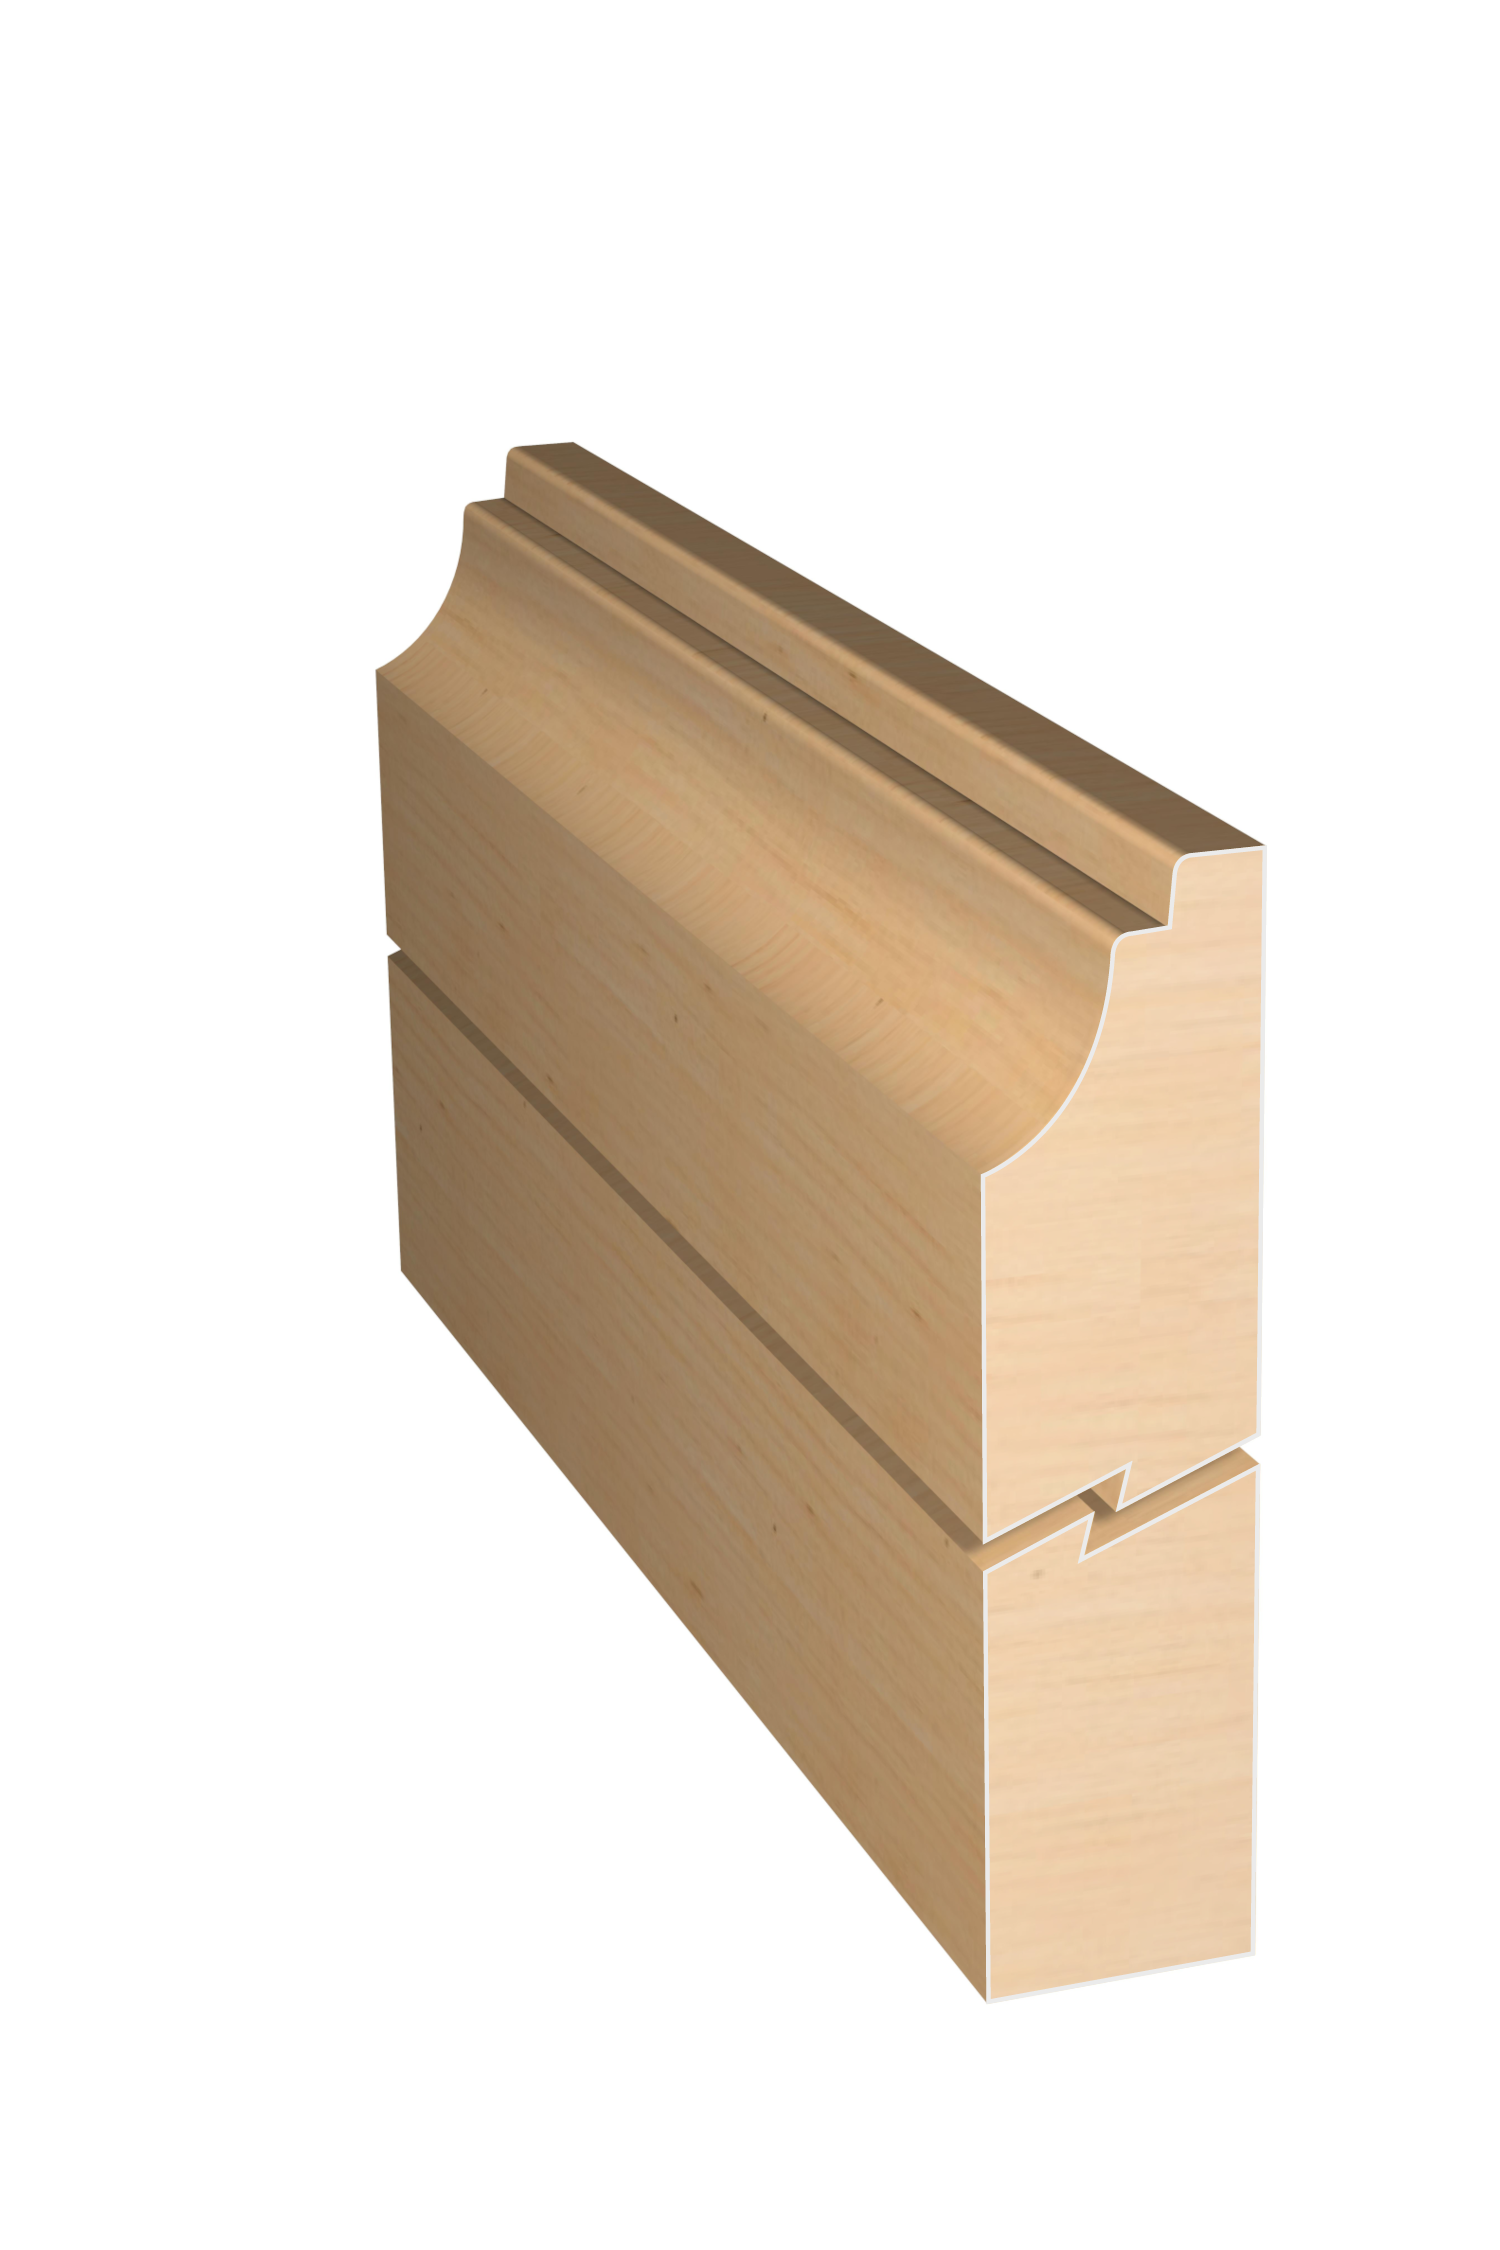 Three dimensional rendering of custom edge profile wood molding SKPL26 made by Public Lumber Company in Detroit.